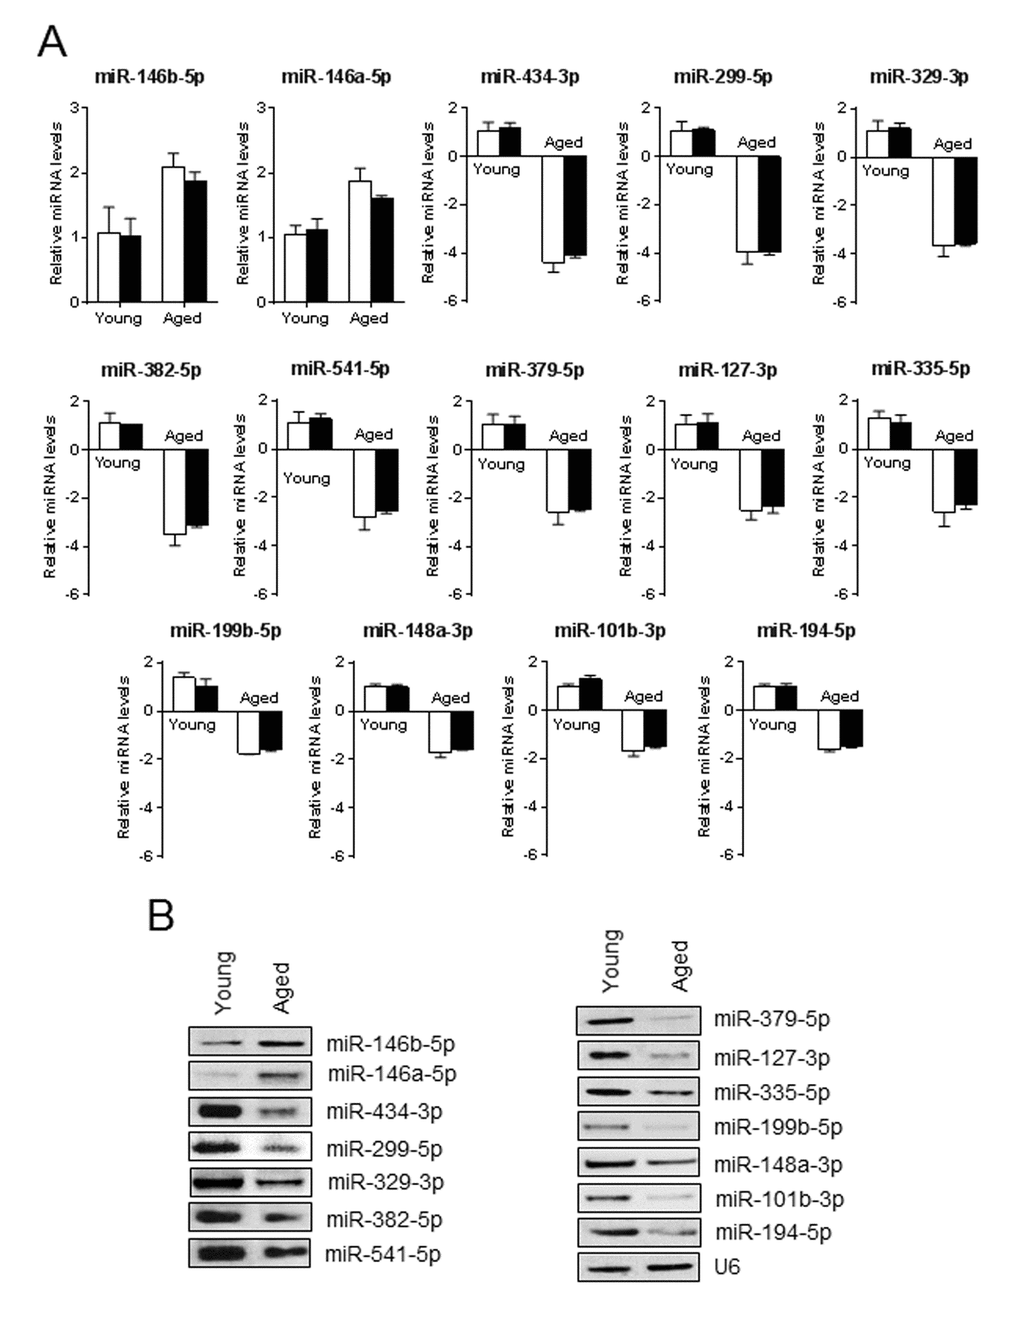 Validation of aging associated miRNA expression profile. (A and B) A portion of RNA used in the microarray was used in qPCR (A) and in a separate experiment by solution hybridization technique with 5’ biotin-labeled miRNAs (B) to confirm the expression level of miRNAs that were differentially regulated ≥1.5-fold in the microarray. U6 served as both loading control and normalizer. Gel pictures are representative of three independent experiments. Each bar indicates mean ± SEM (n = 3). White and black bars indicate the levels of miRNA measured by microarray and qPCR, respectively.